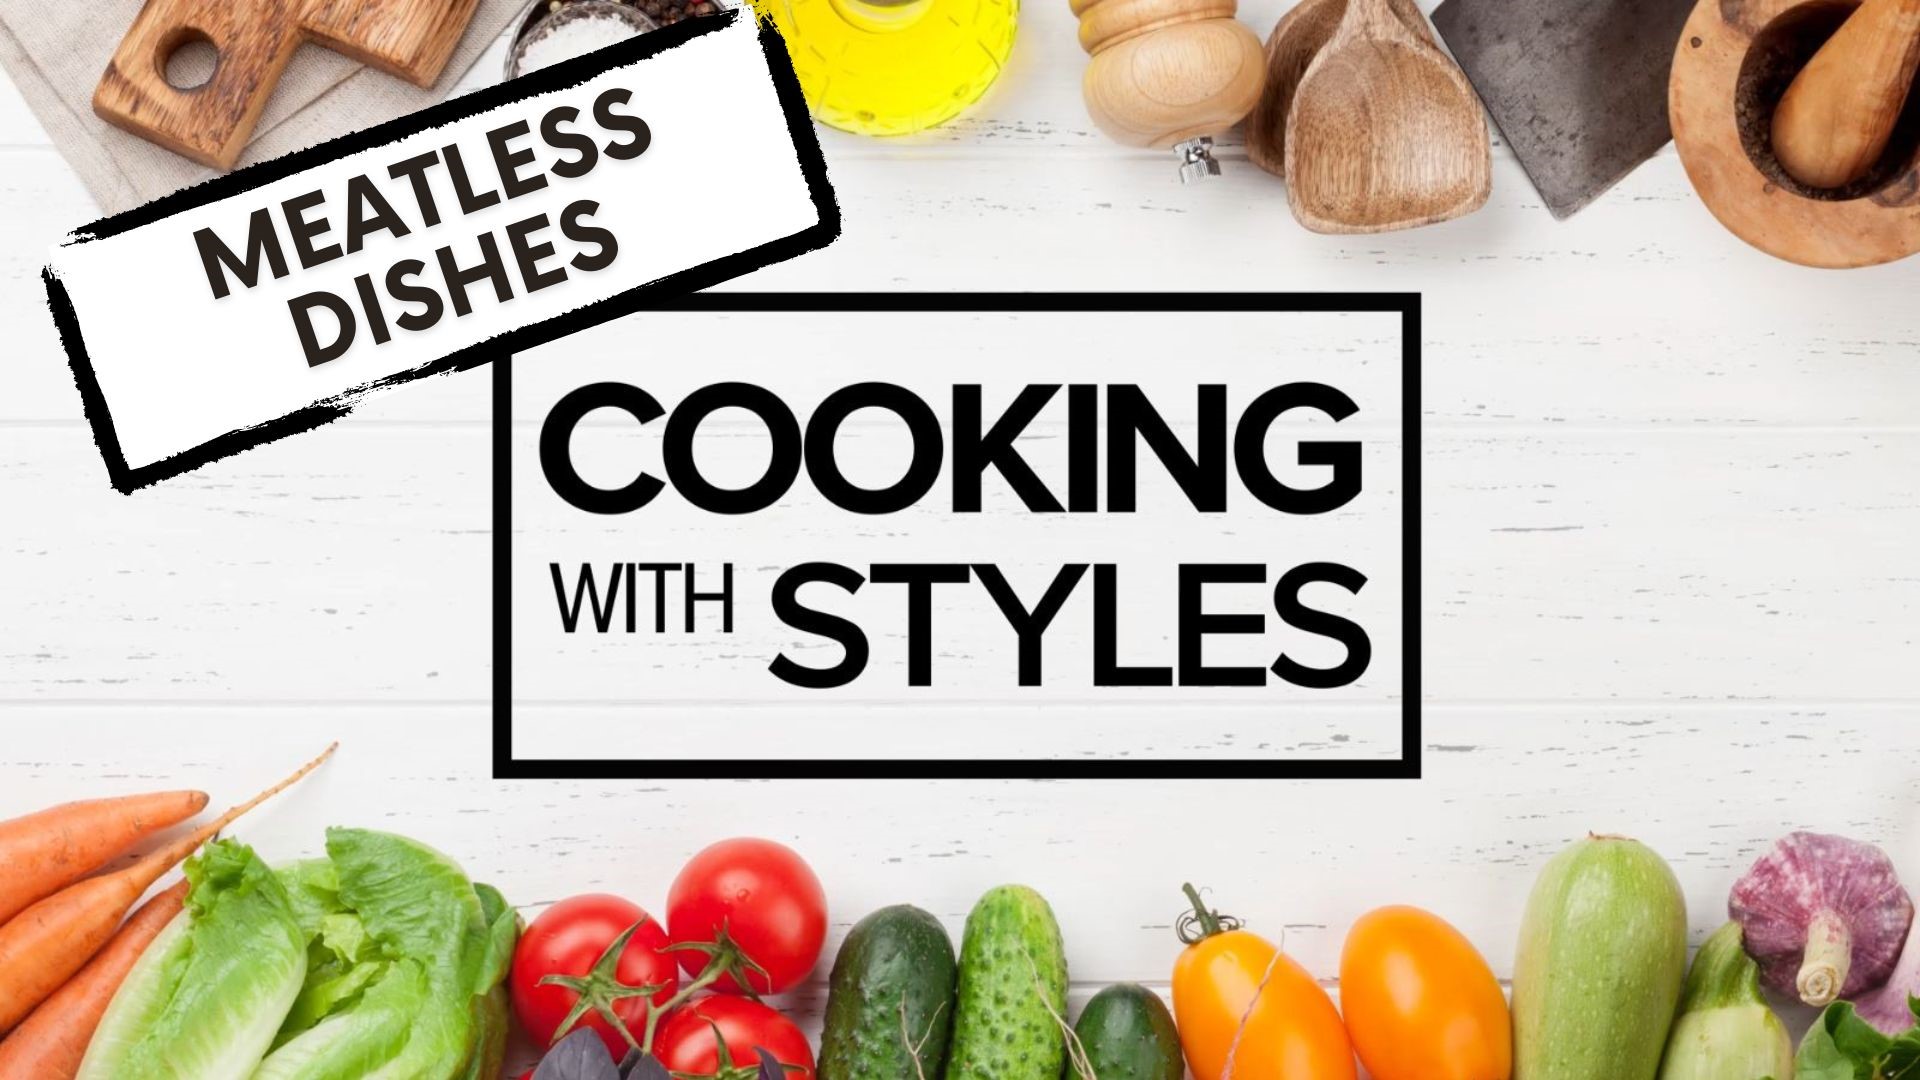 KFMB's Shawn Styles shares some recipes the whole family can enjoy-- without eating meat! From breakfast to dinner, here are some of his meatless favorites.